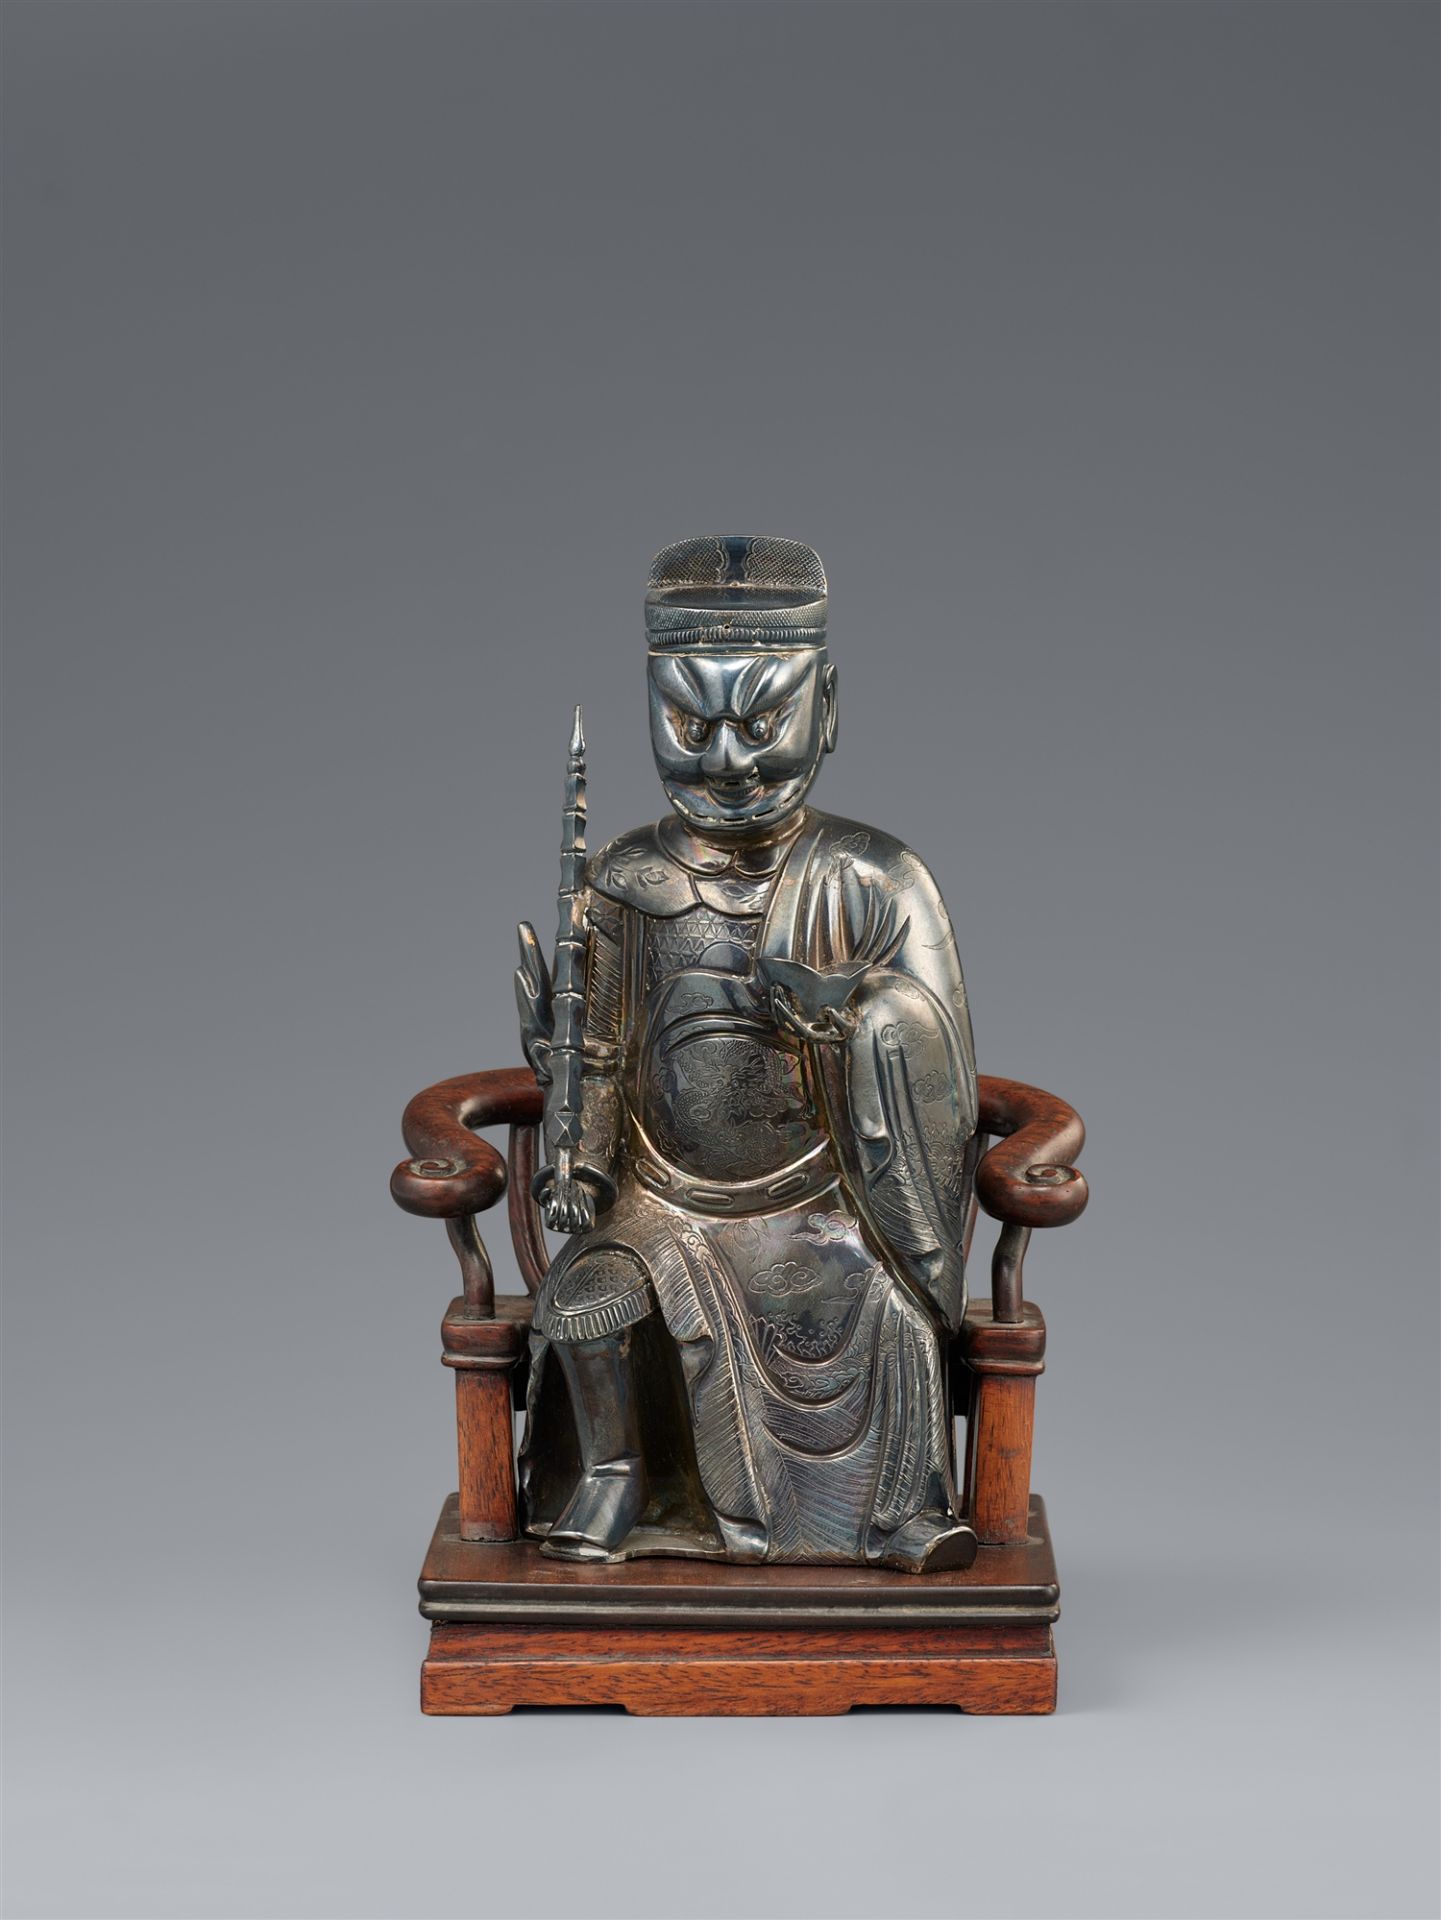 A hollow-cast silver figure of a dignitary on a wooden chair. Shanghai. Around 1900